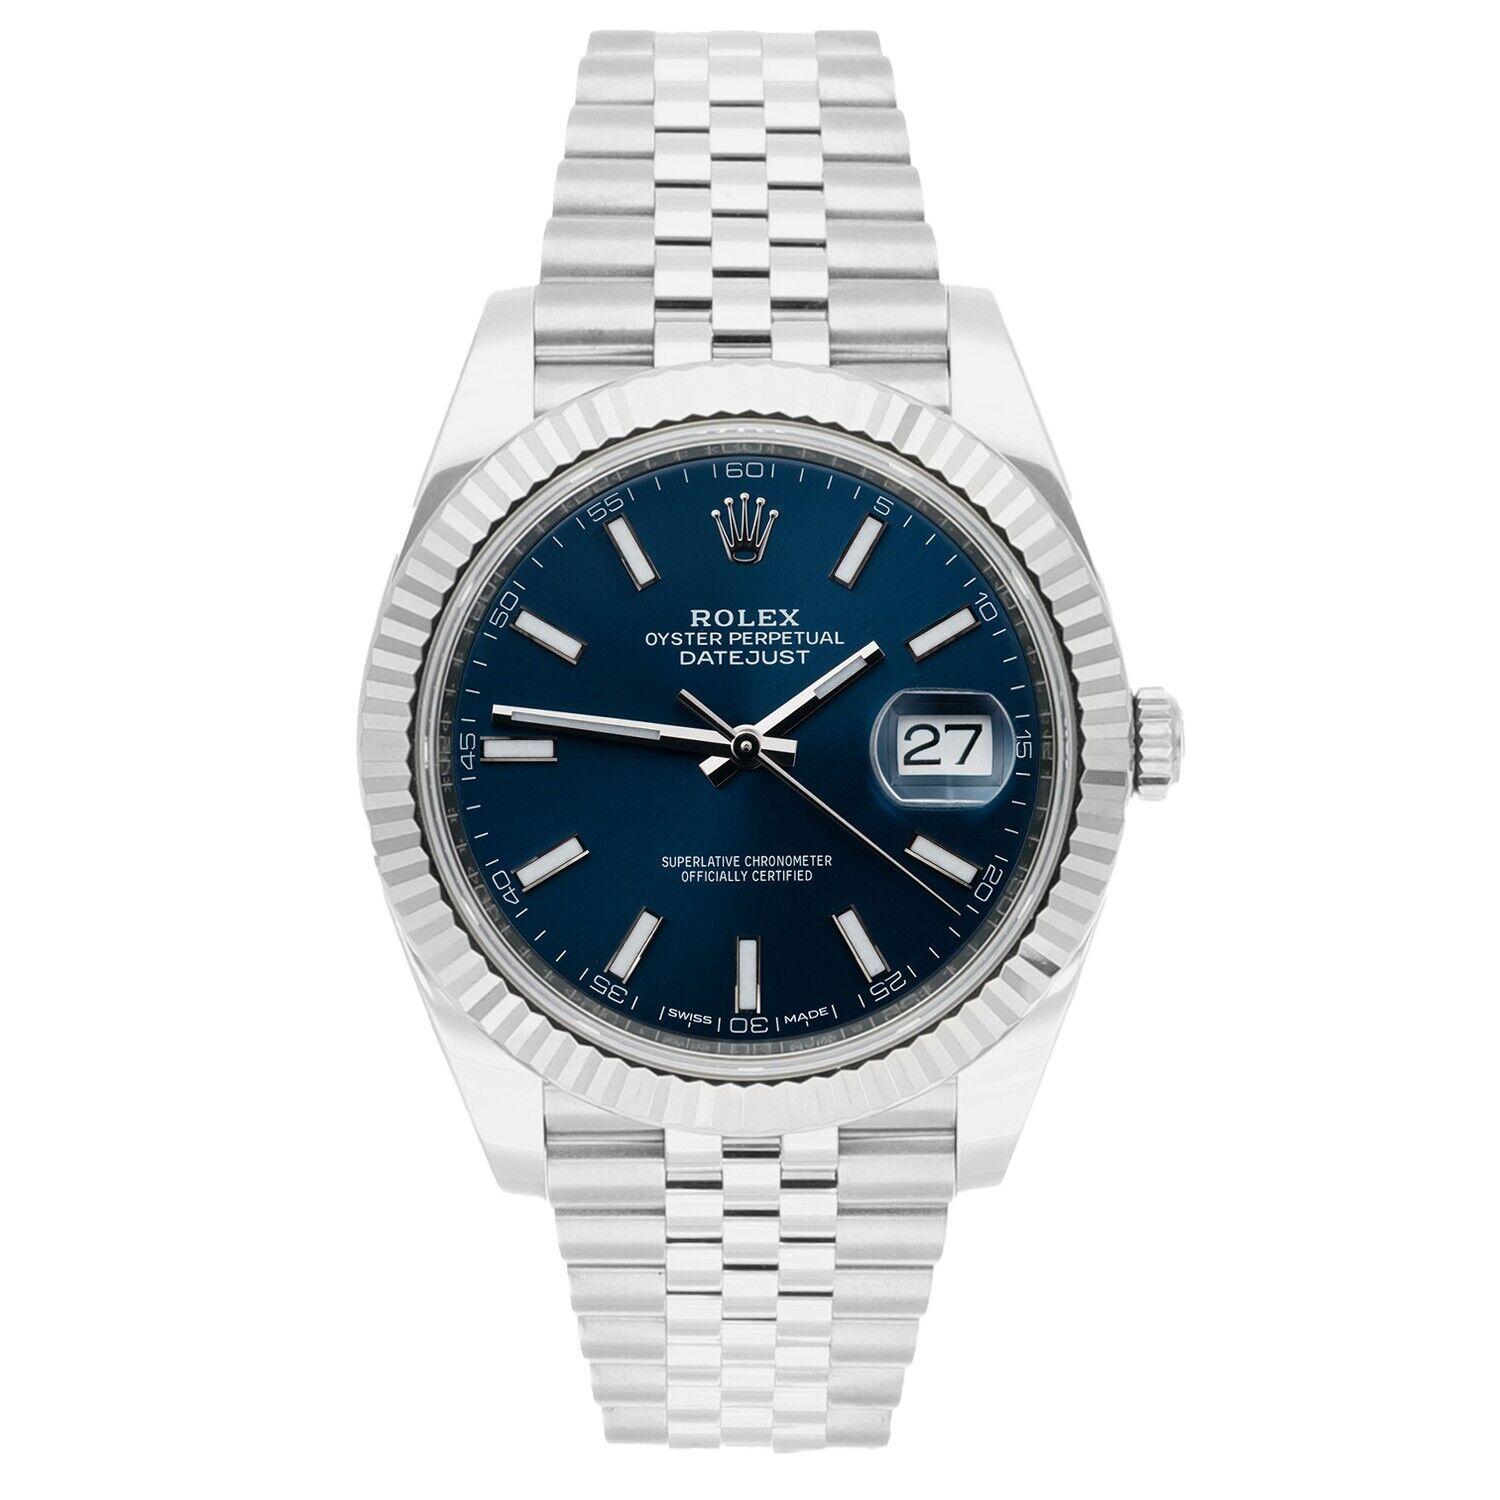 Stainless steel case with a stainless steel Rolex jubilee bracelet. Fixed fluted 18kt white gold bezel. Blue dial with silver-tone hands and index hour markers. Minute markers around the outer rim. Dial Type: Analog. Date display at the 3 o'clock